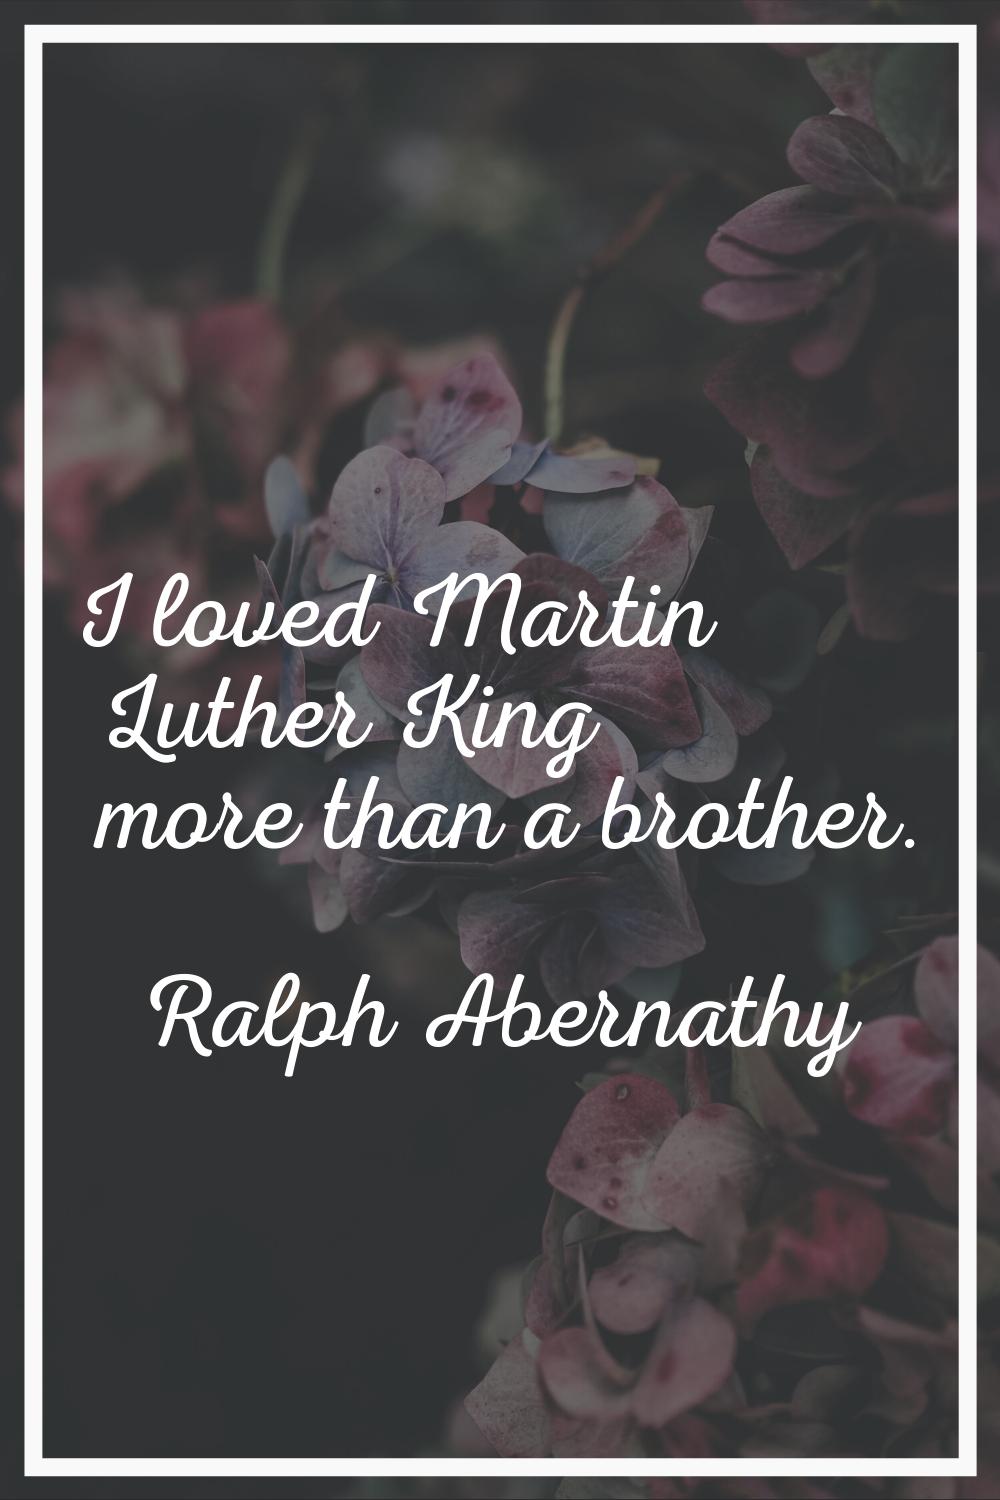 I loved Martin Luther King more than a brother.